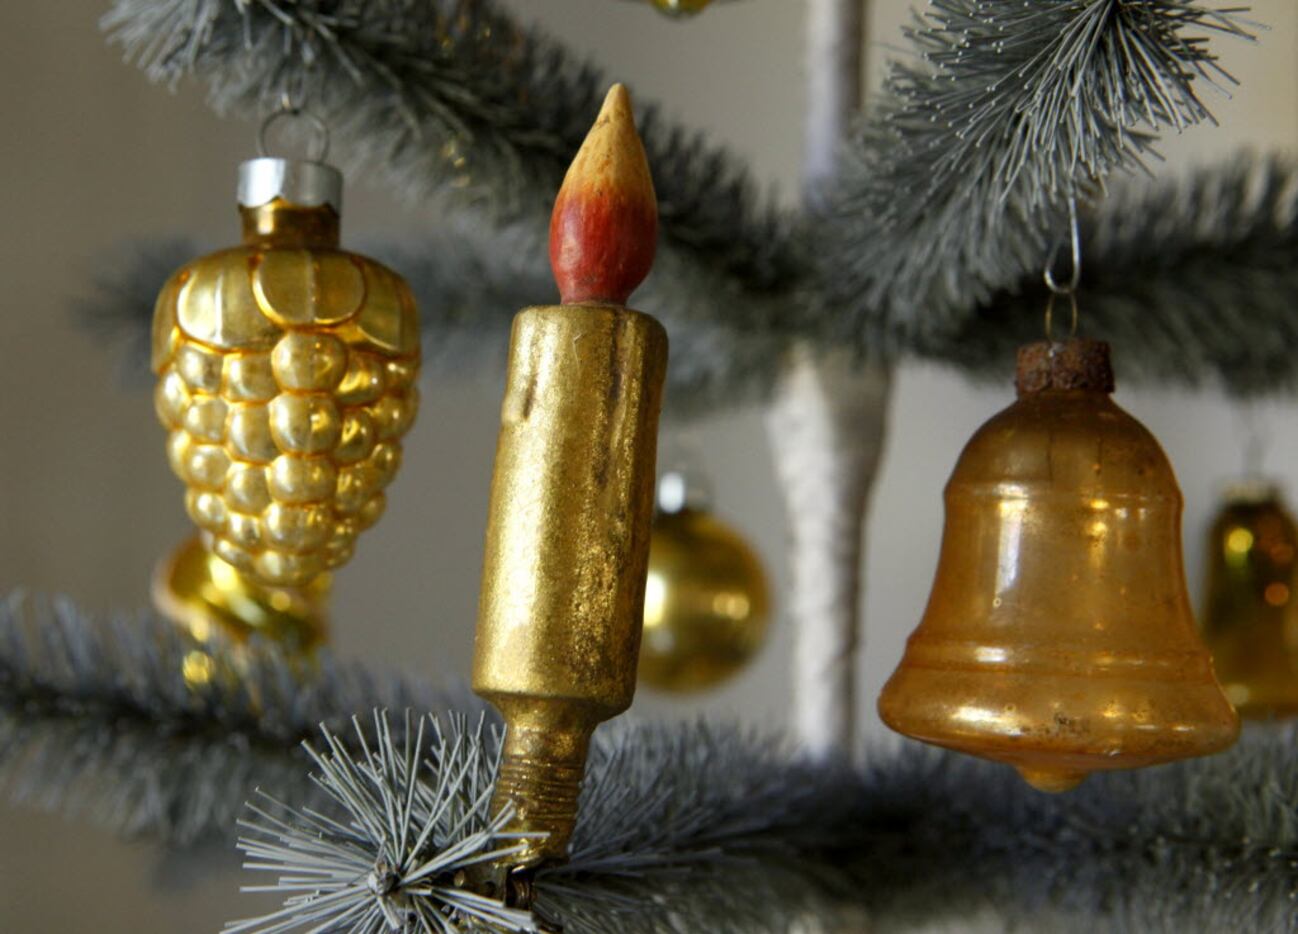  Vintage Christmas decorations collected by Jason McDaniel are displayed at his home in...